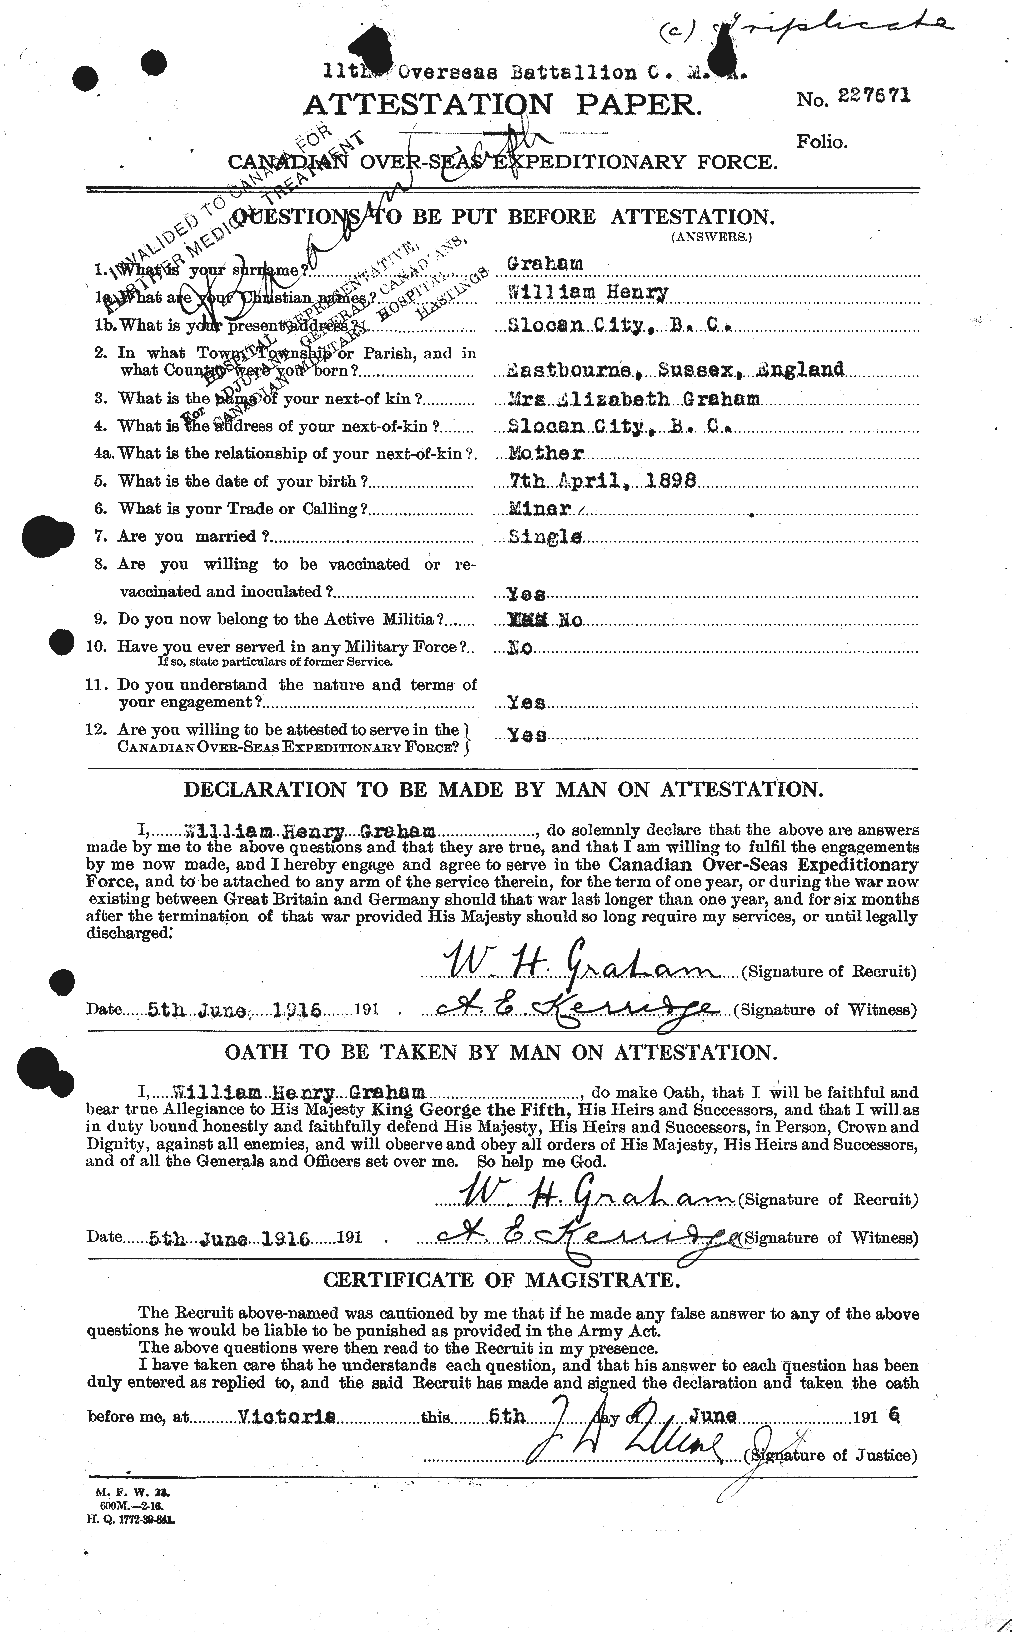 Personnel Records of the First World War - CEF 358000a